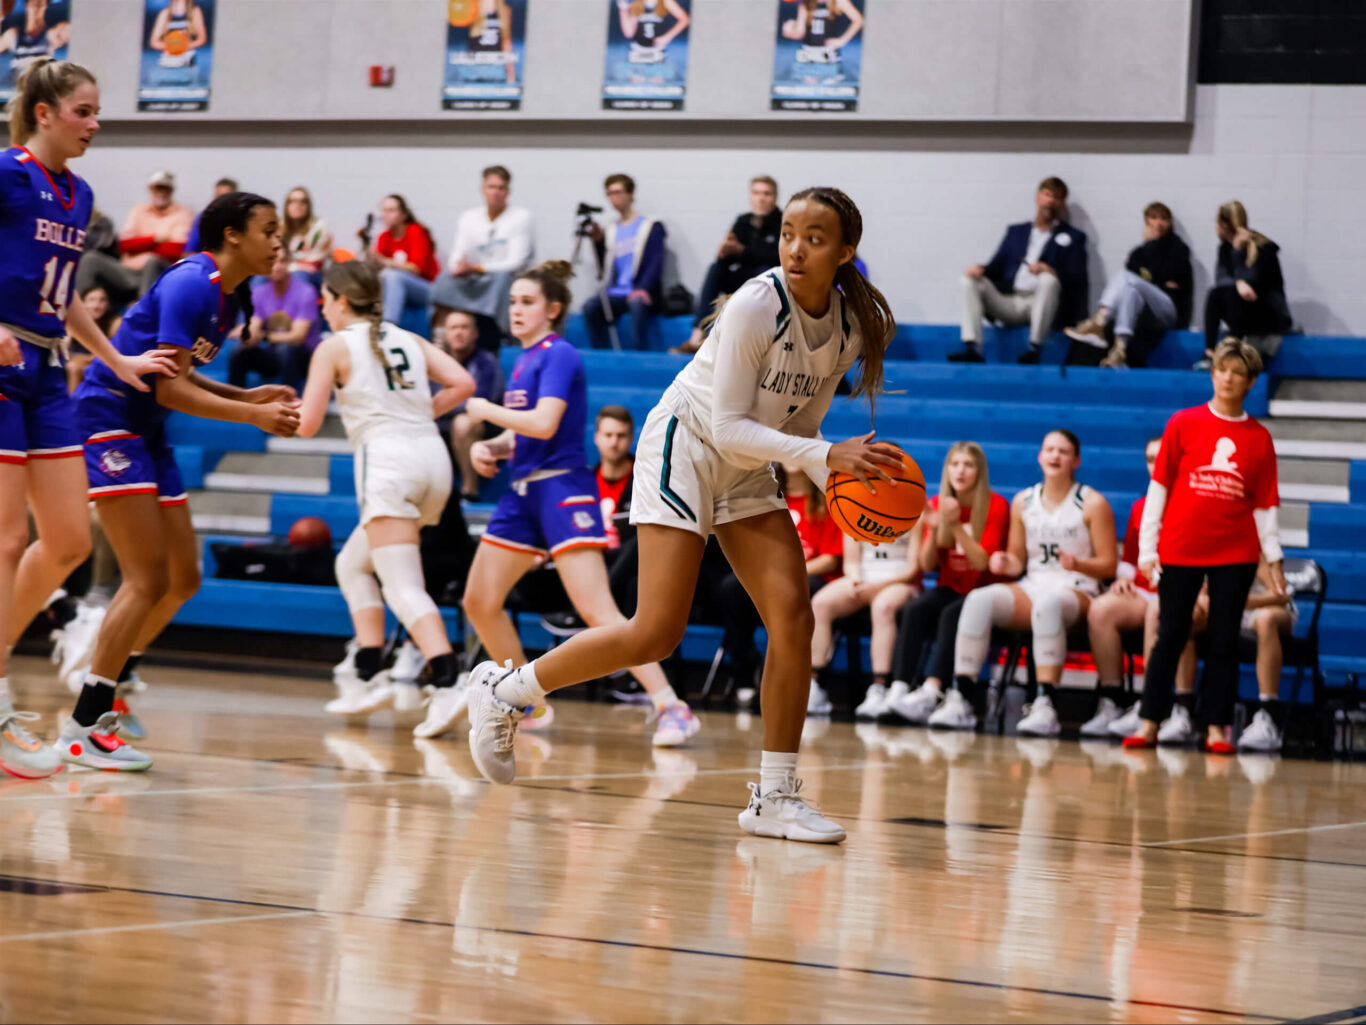 A girls' basketball player dribbling the ball on a court.